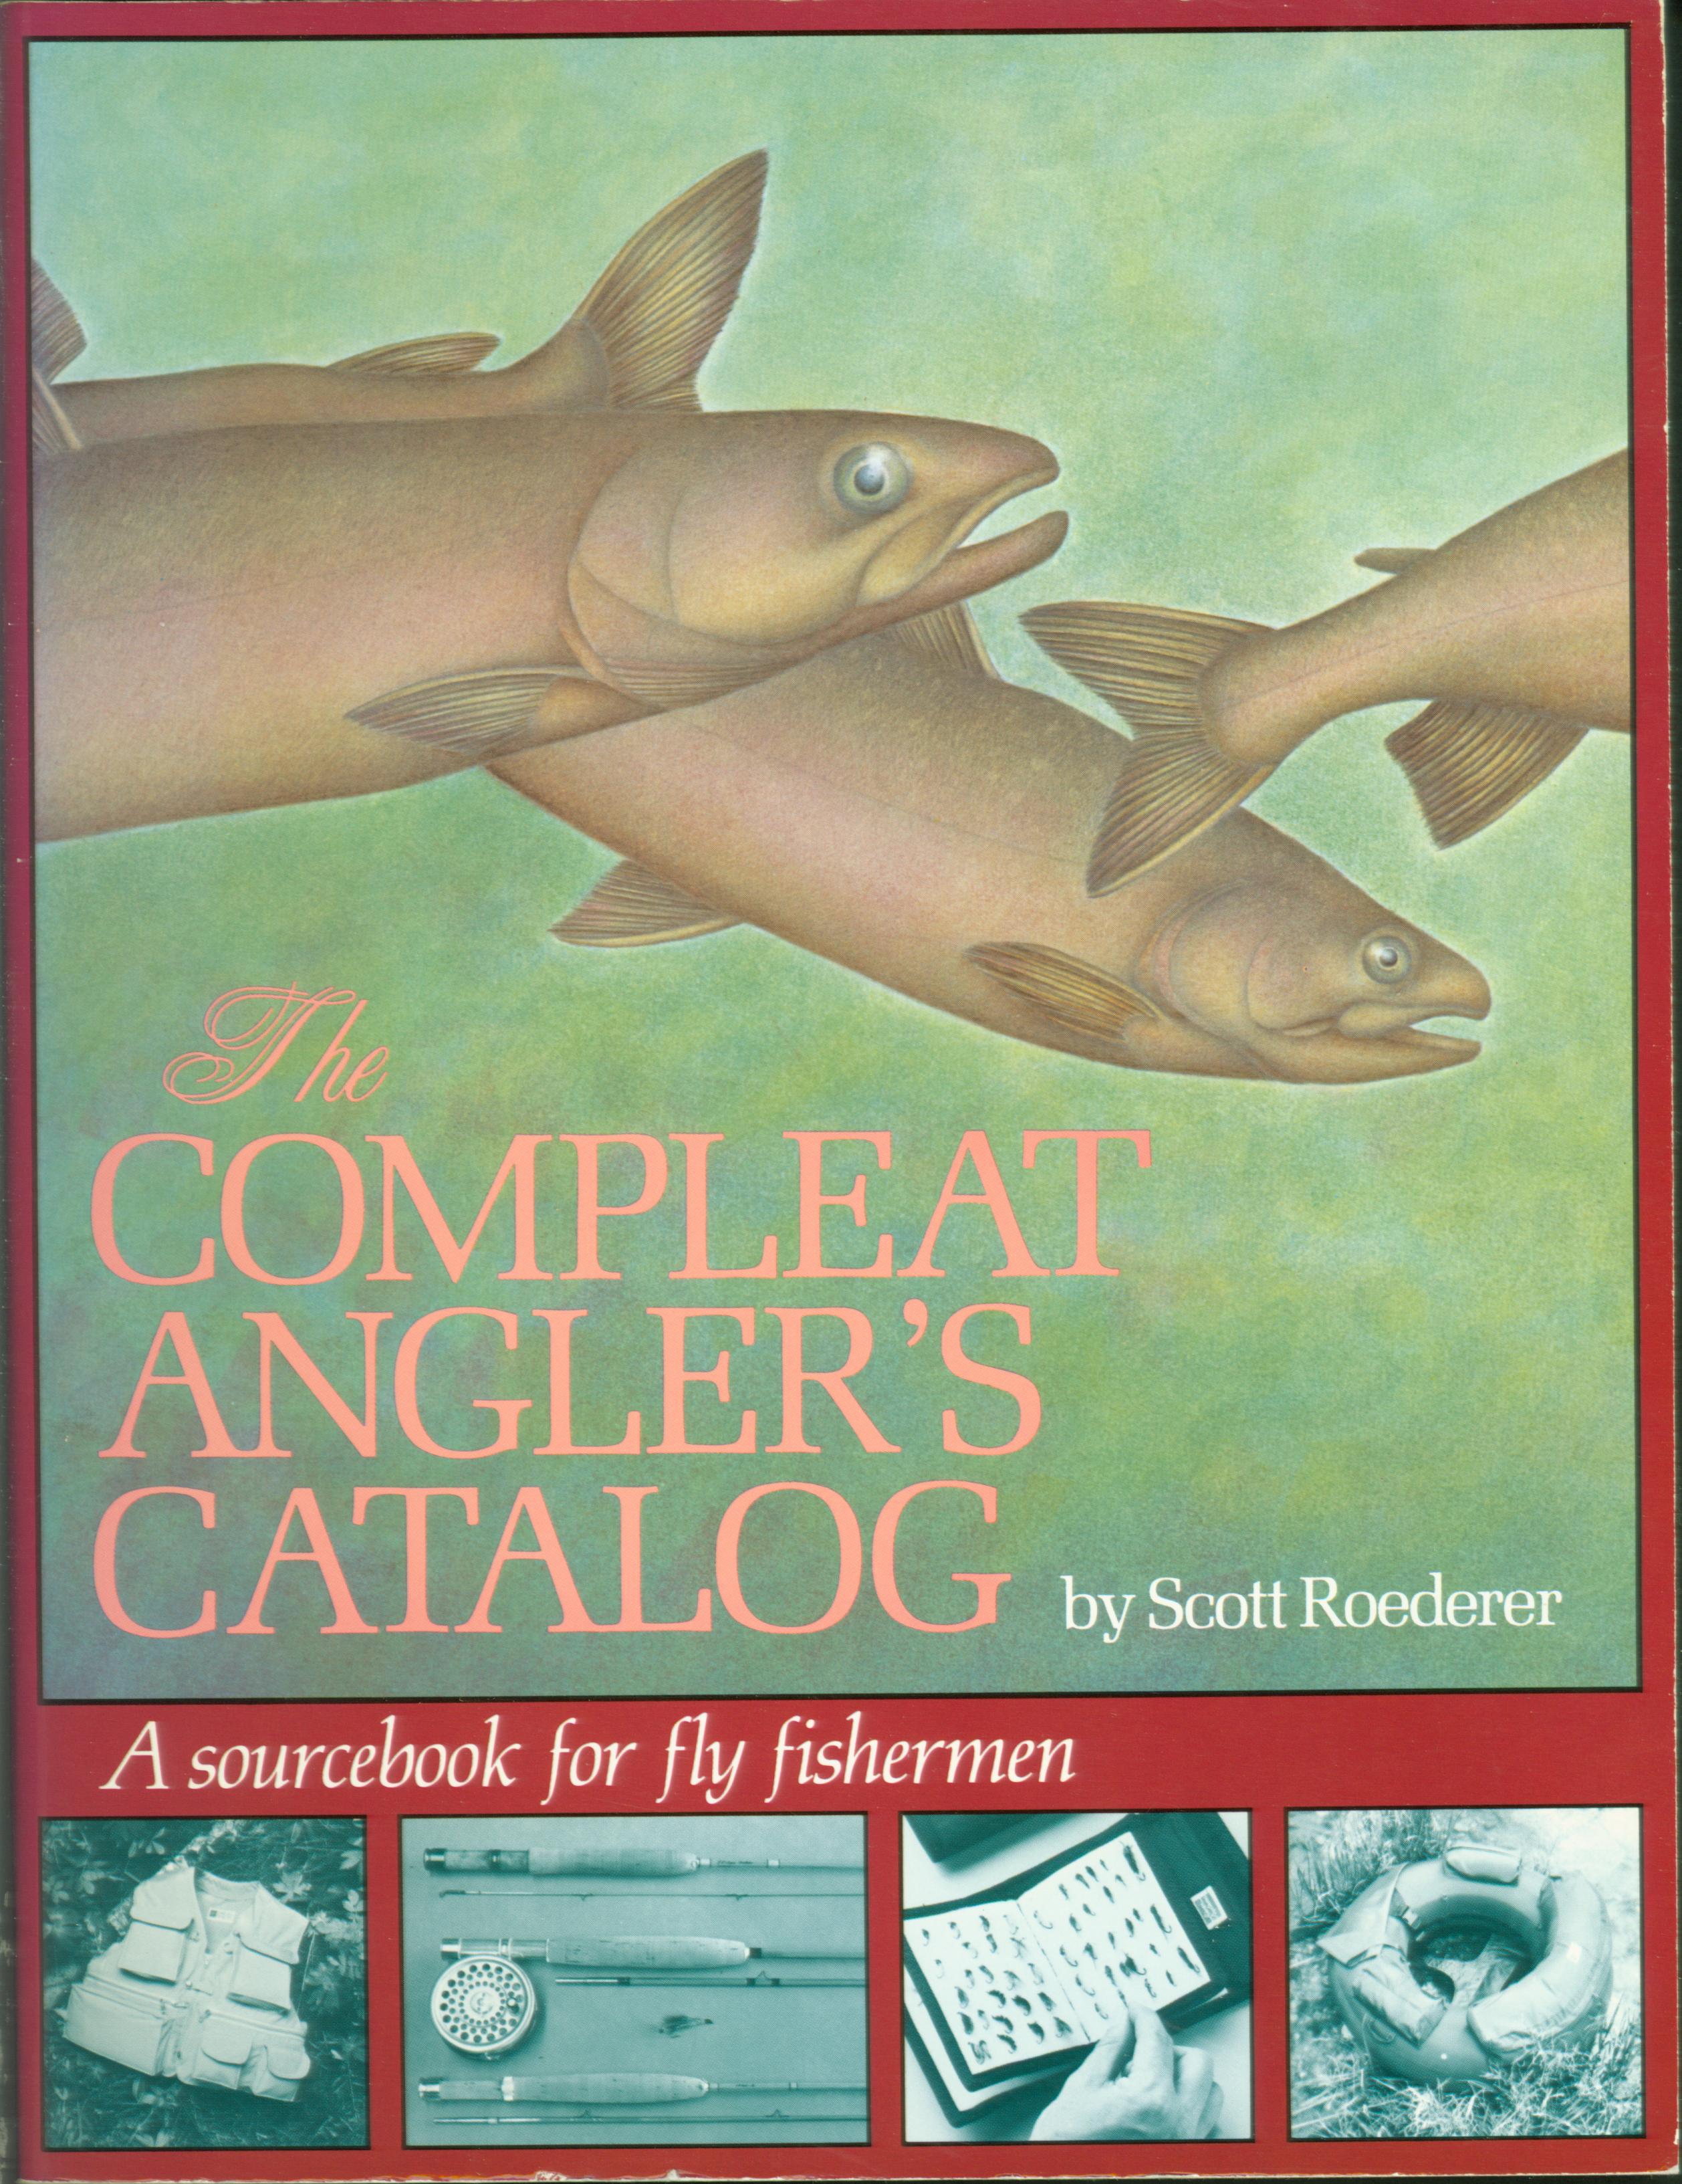 THE COMPLEAT ANGLER'S CATALOG: a sourcebook for fly fishermen.